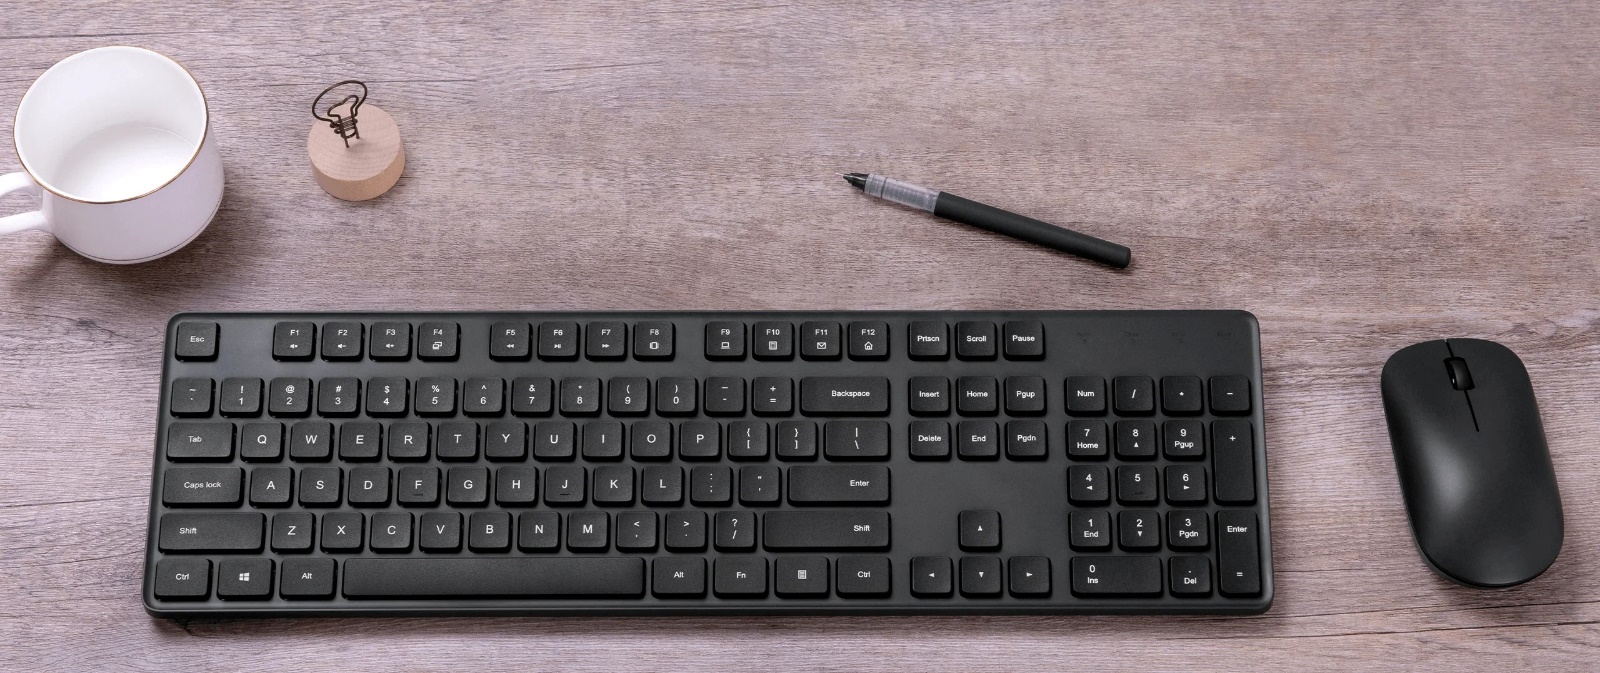 Xiaomi wireless mouse and keyboard